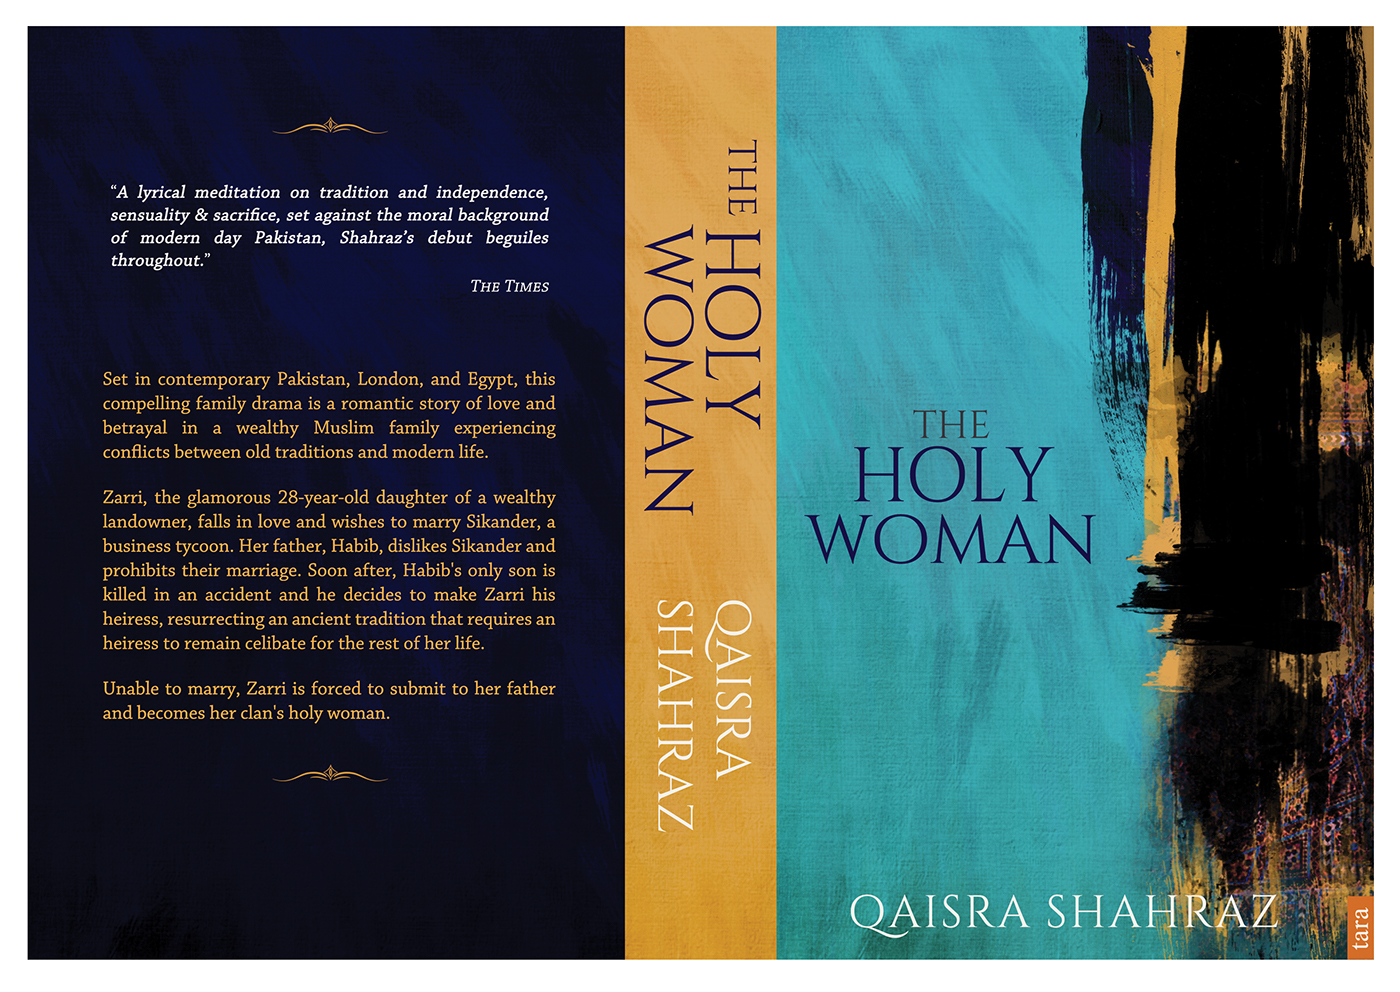 The holy woman Cover Art book cover art direction 